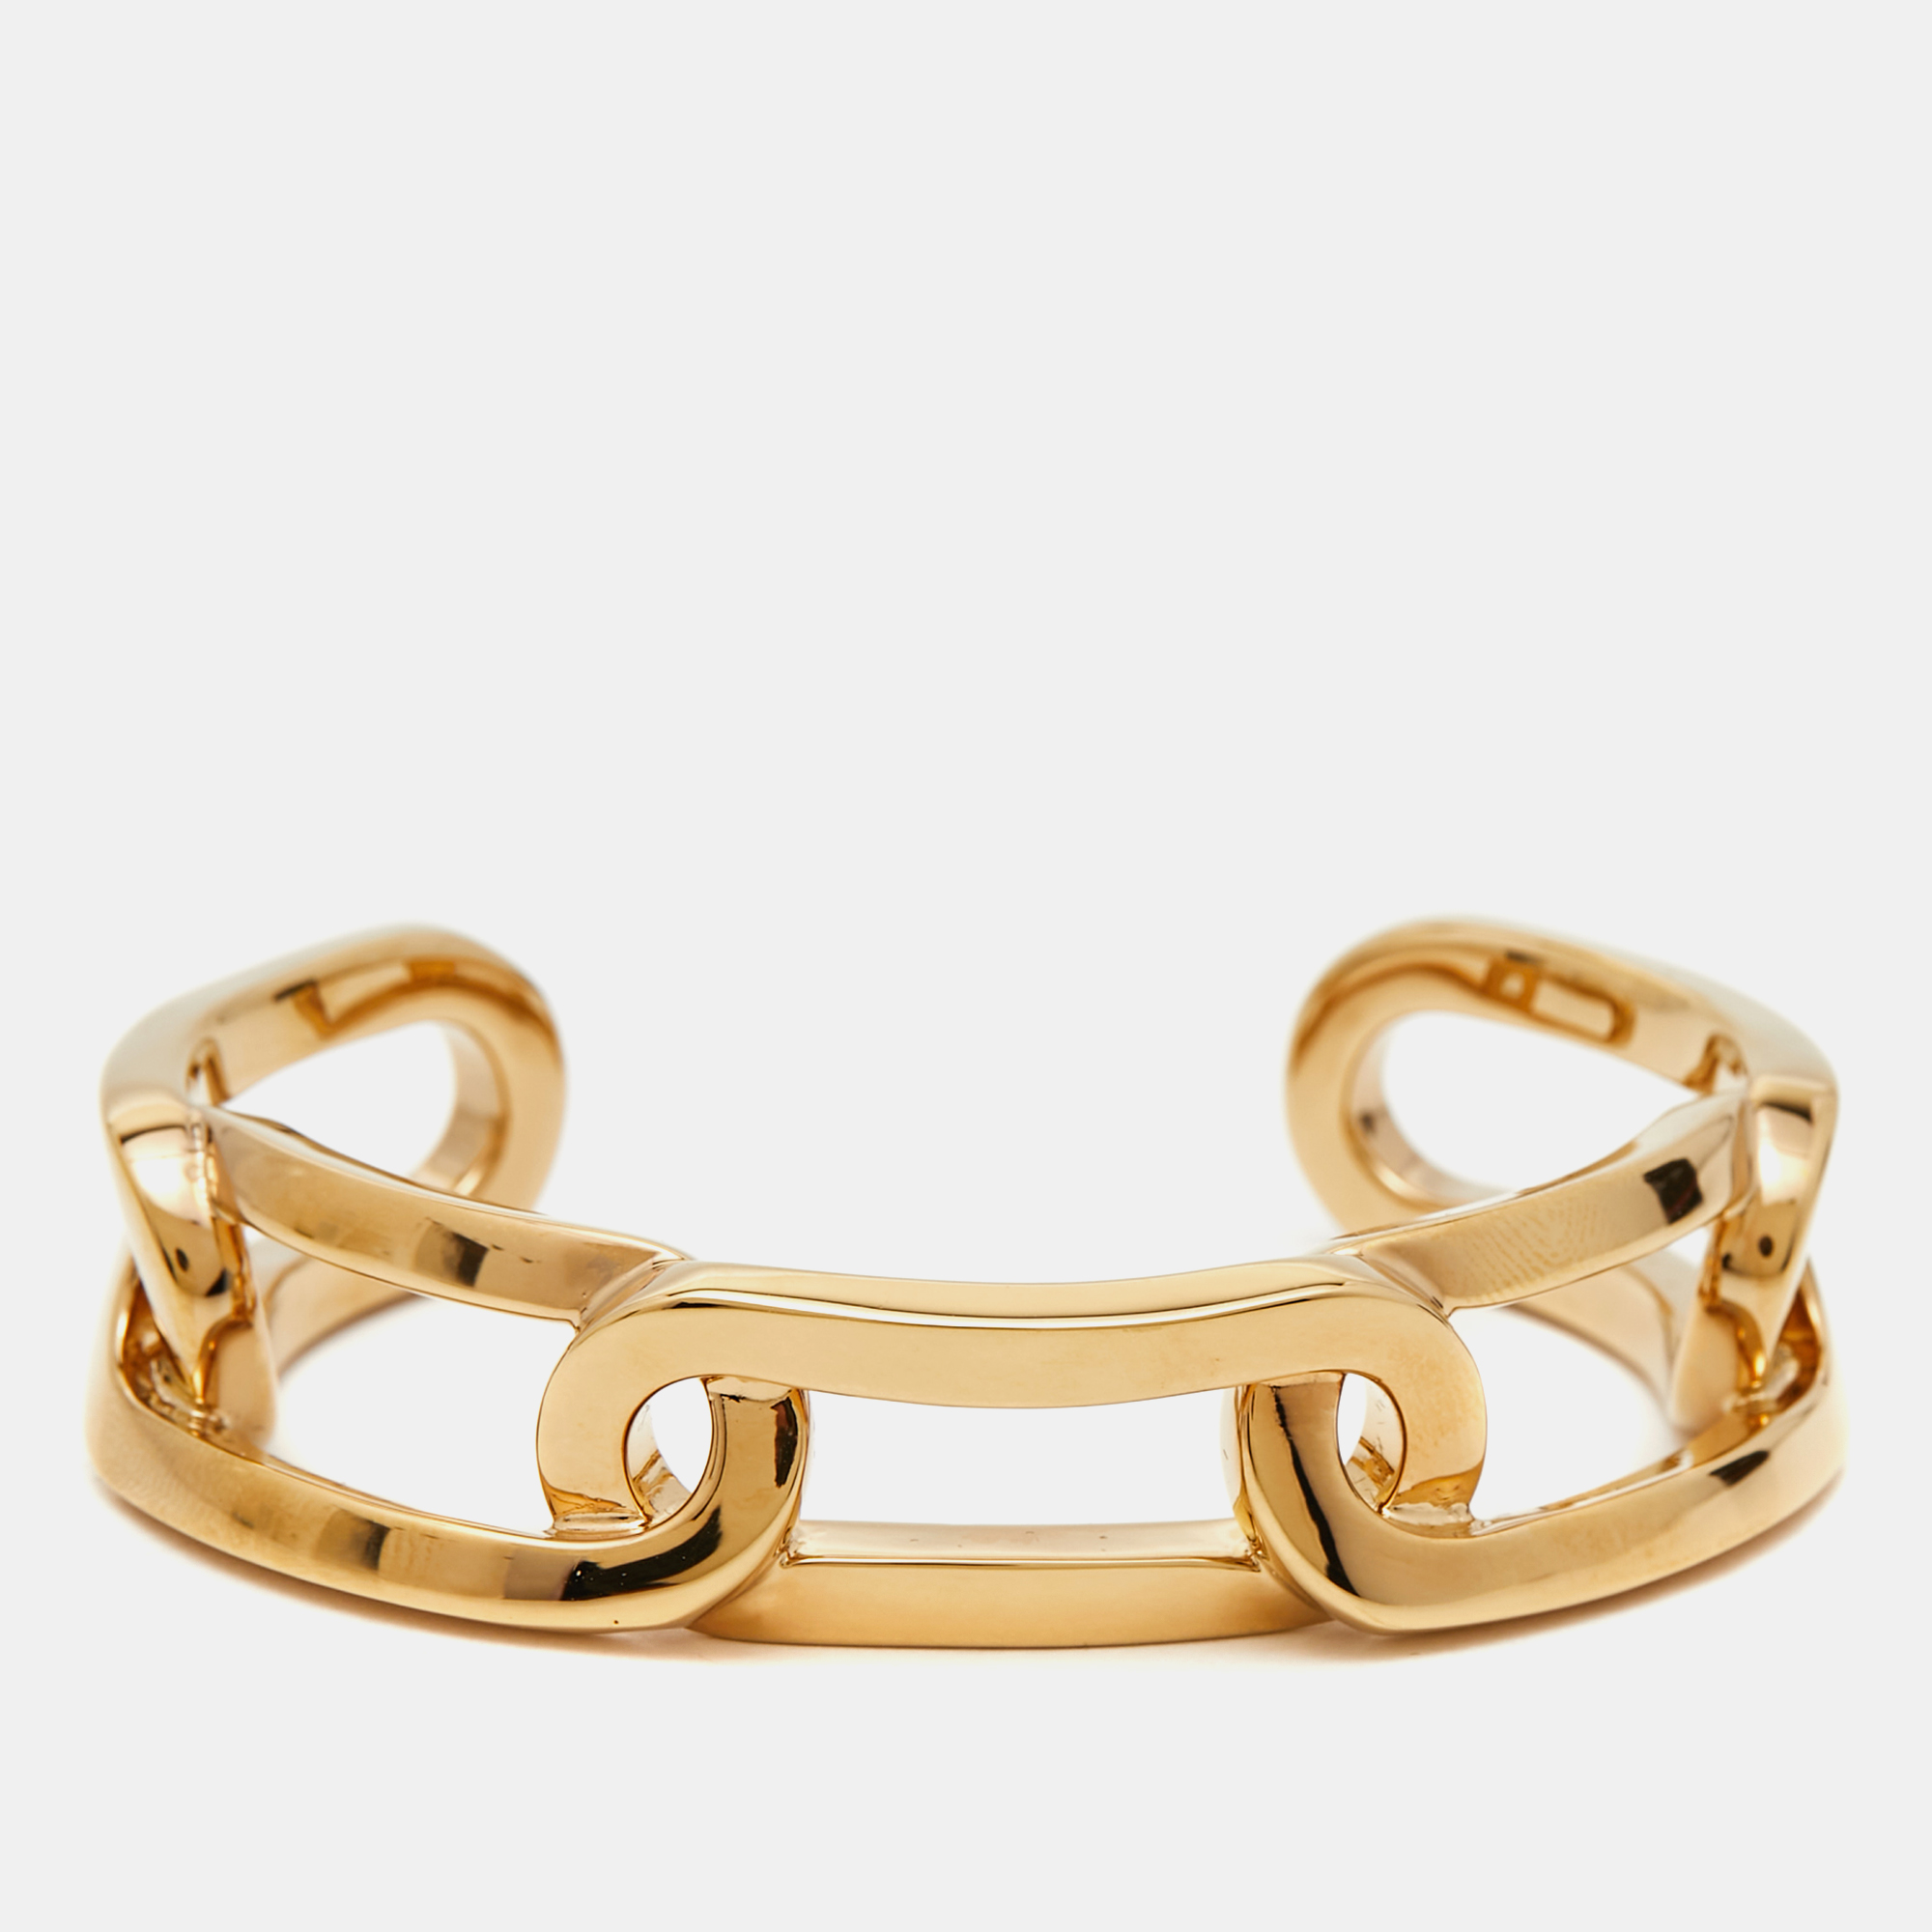 This beautiful Burberry chain link cuff bracelet is sure to stand out when it sits on your wrist. Crafted with precision the fine bracelet will be an investment youll love.